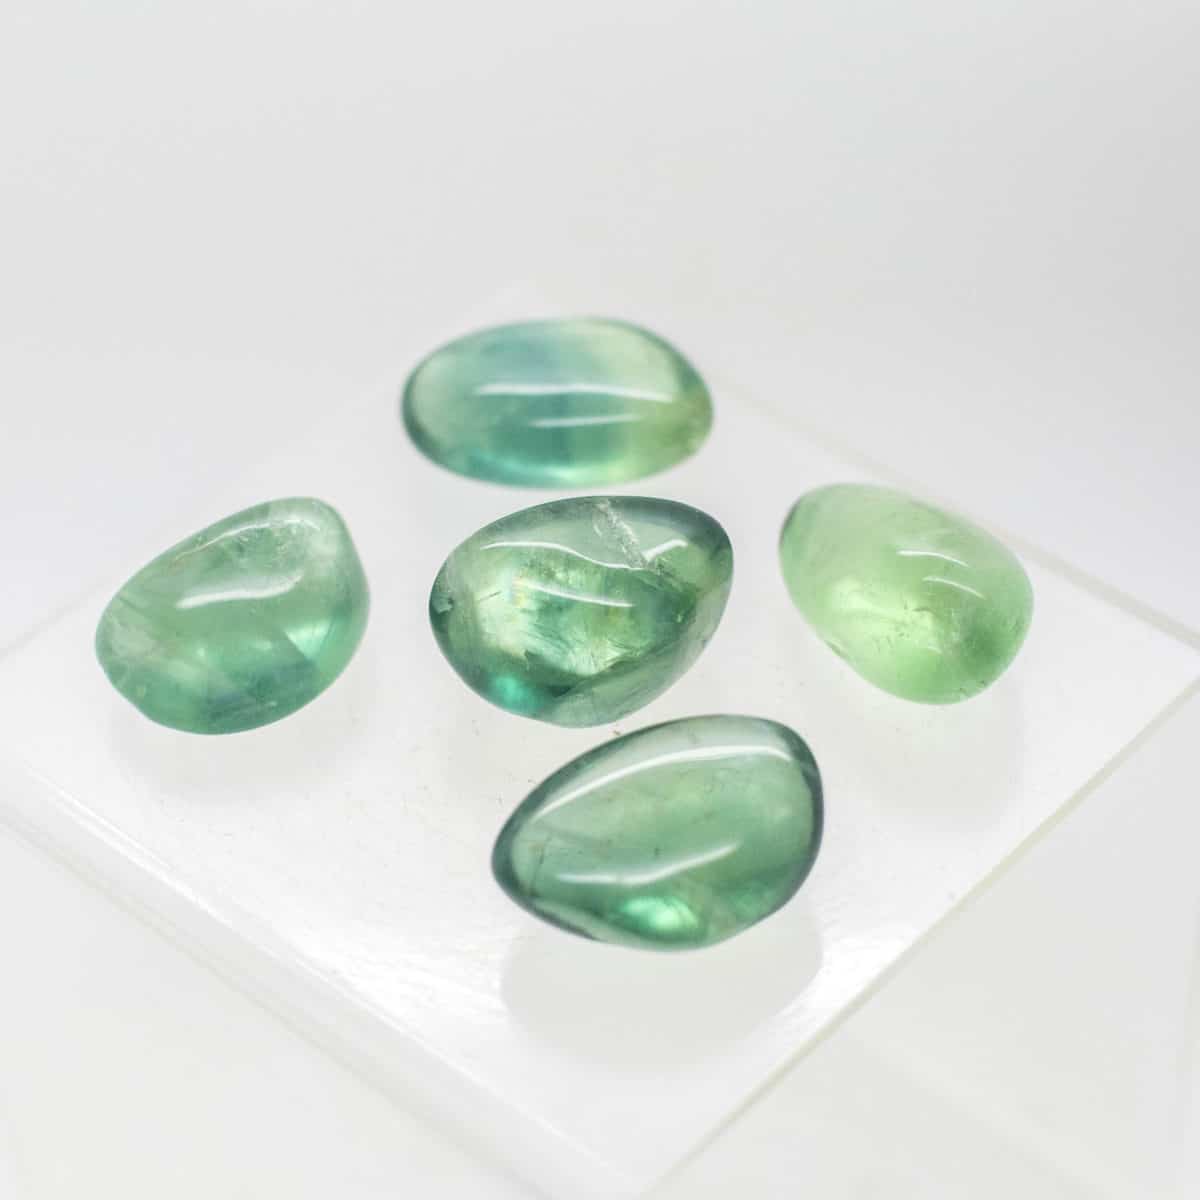 Buy Fluorite Green Tumbled Stones 4082 - Colliers Crystals